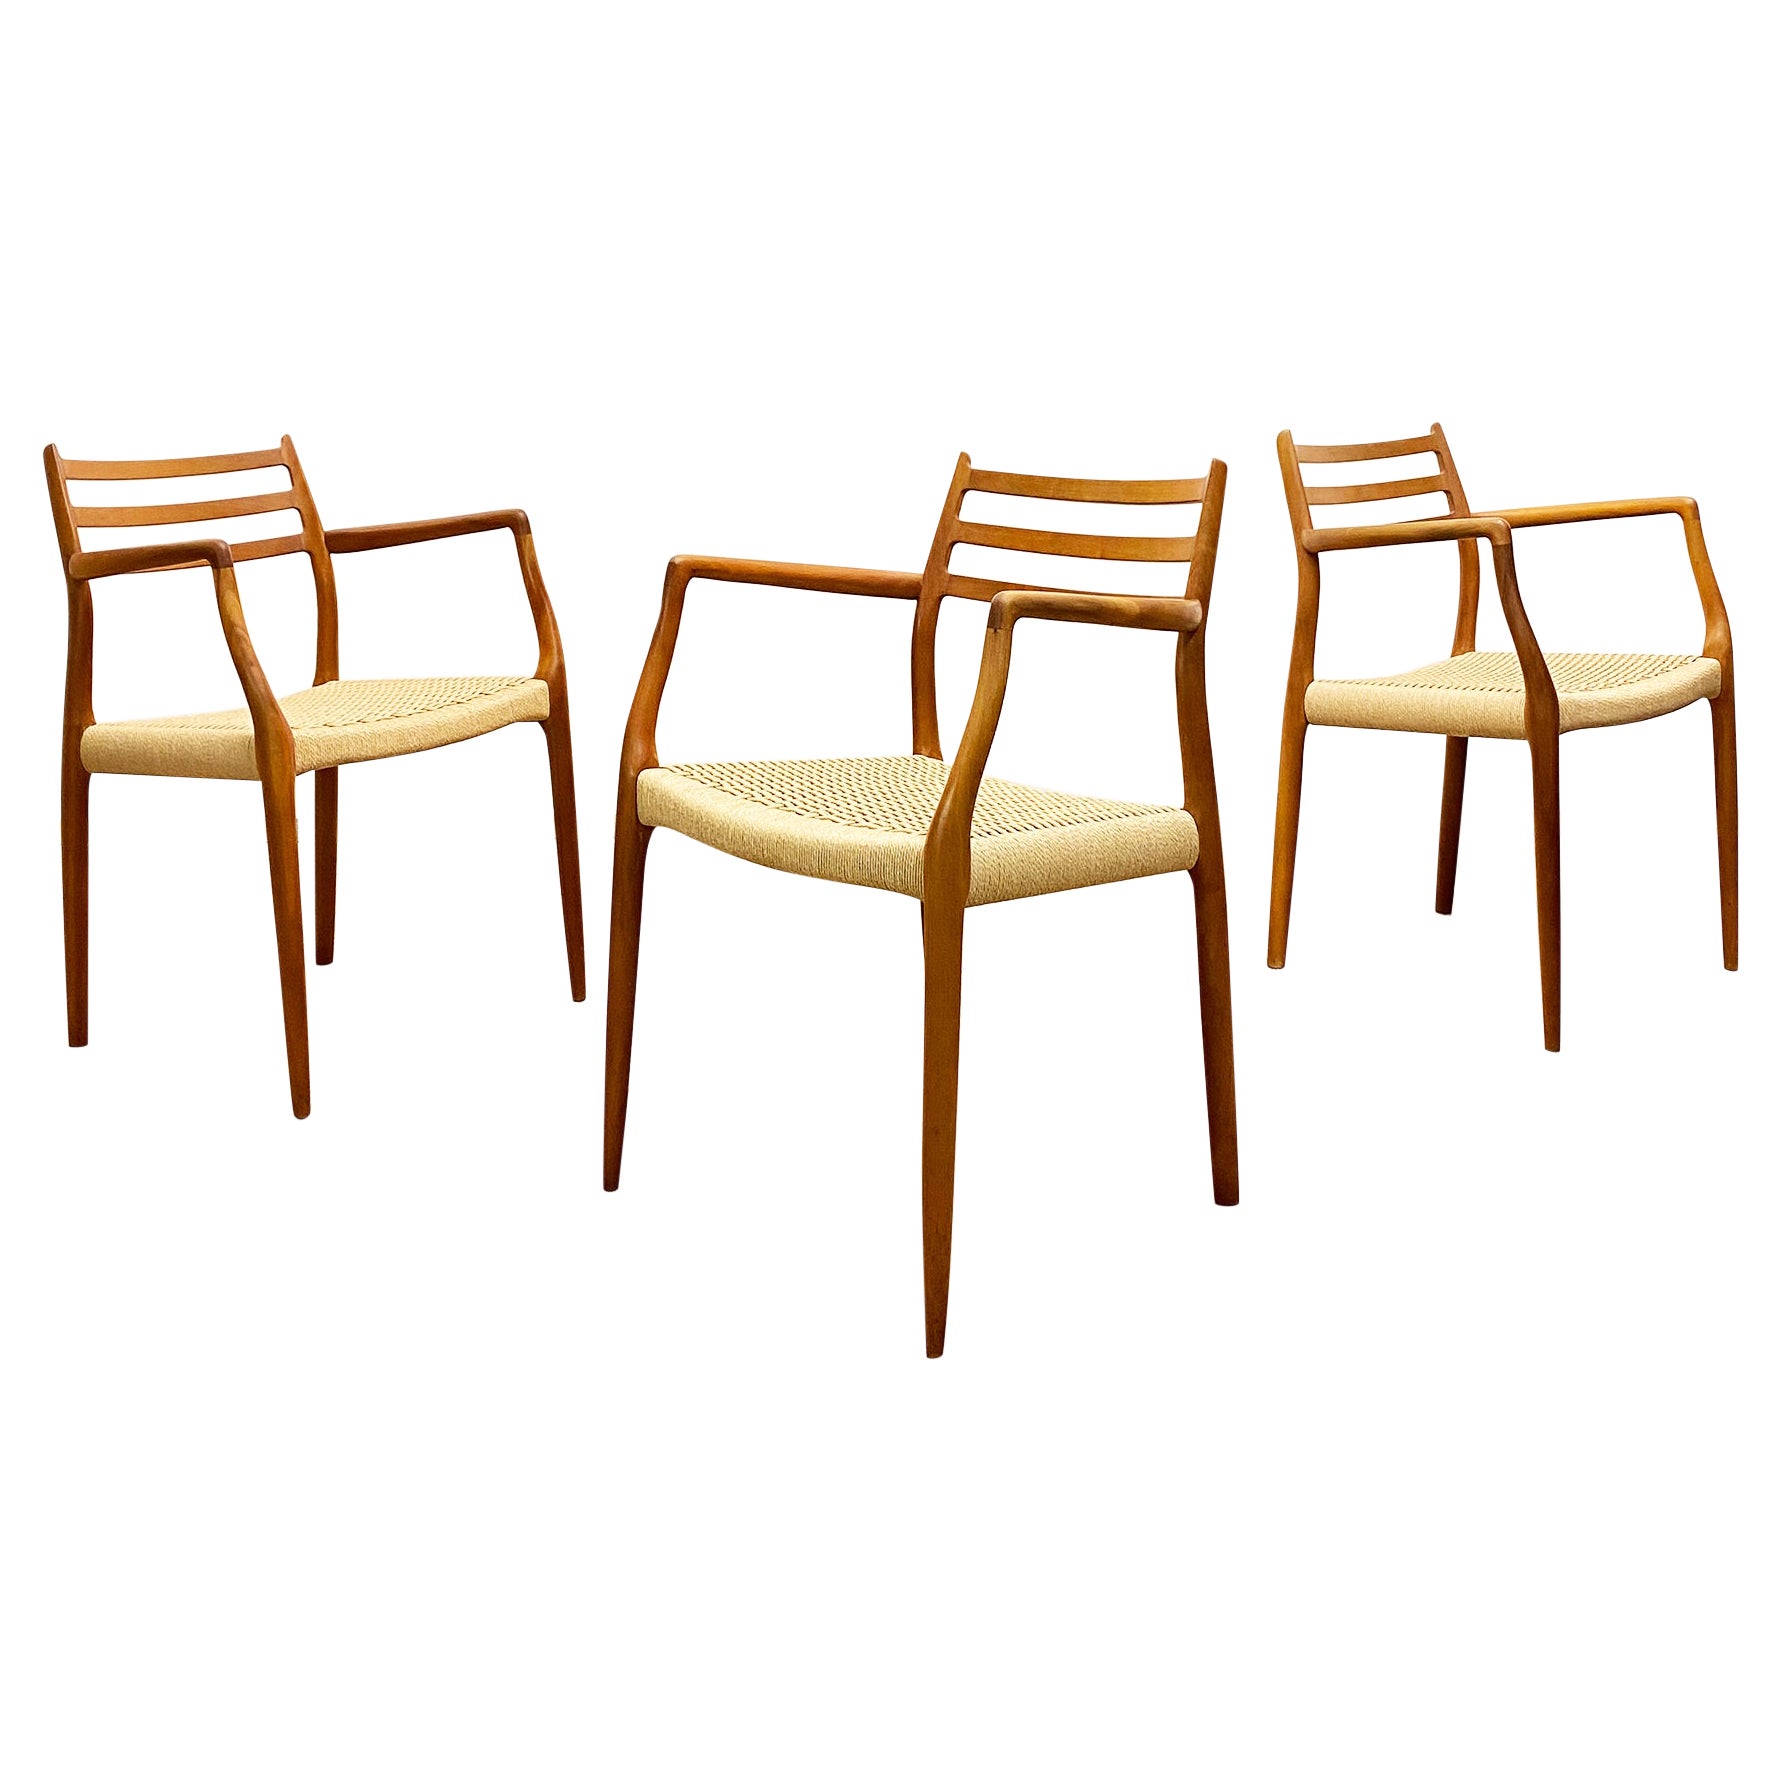 3 Mid-Century Teak Dining Chairs #62 by Niels O. Møller for J. L. Moller